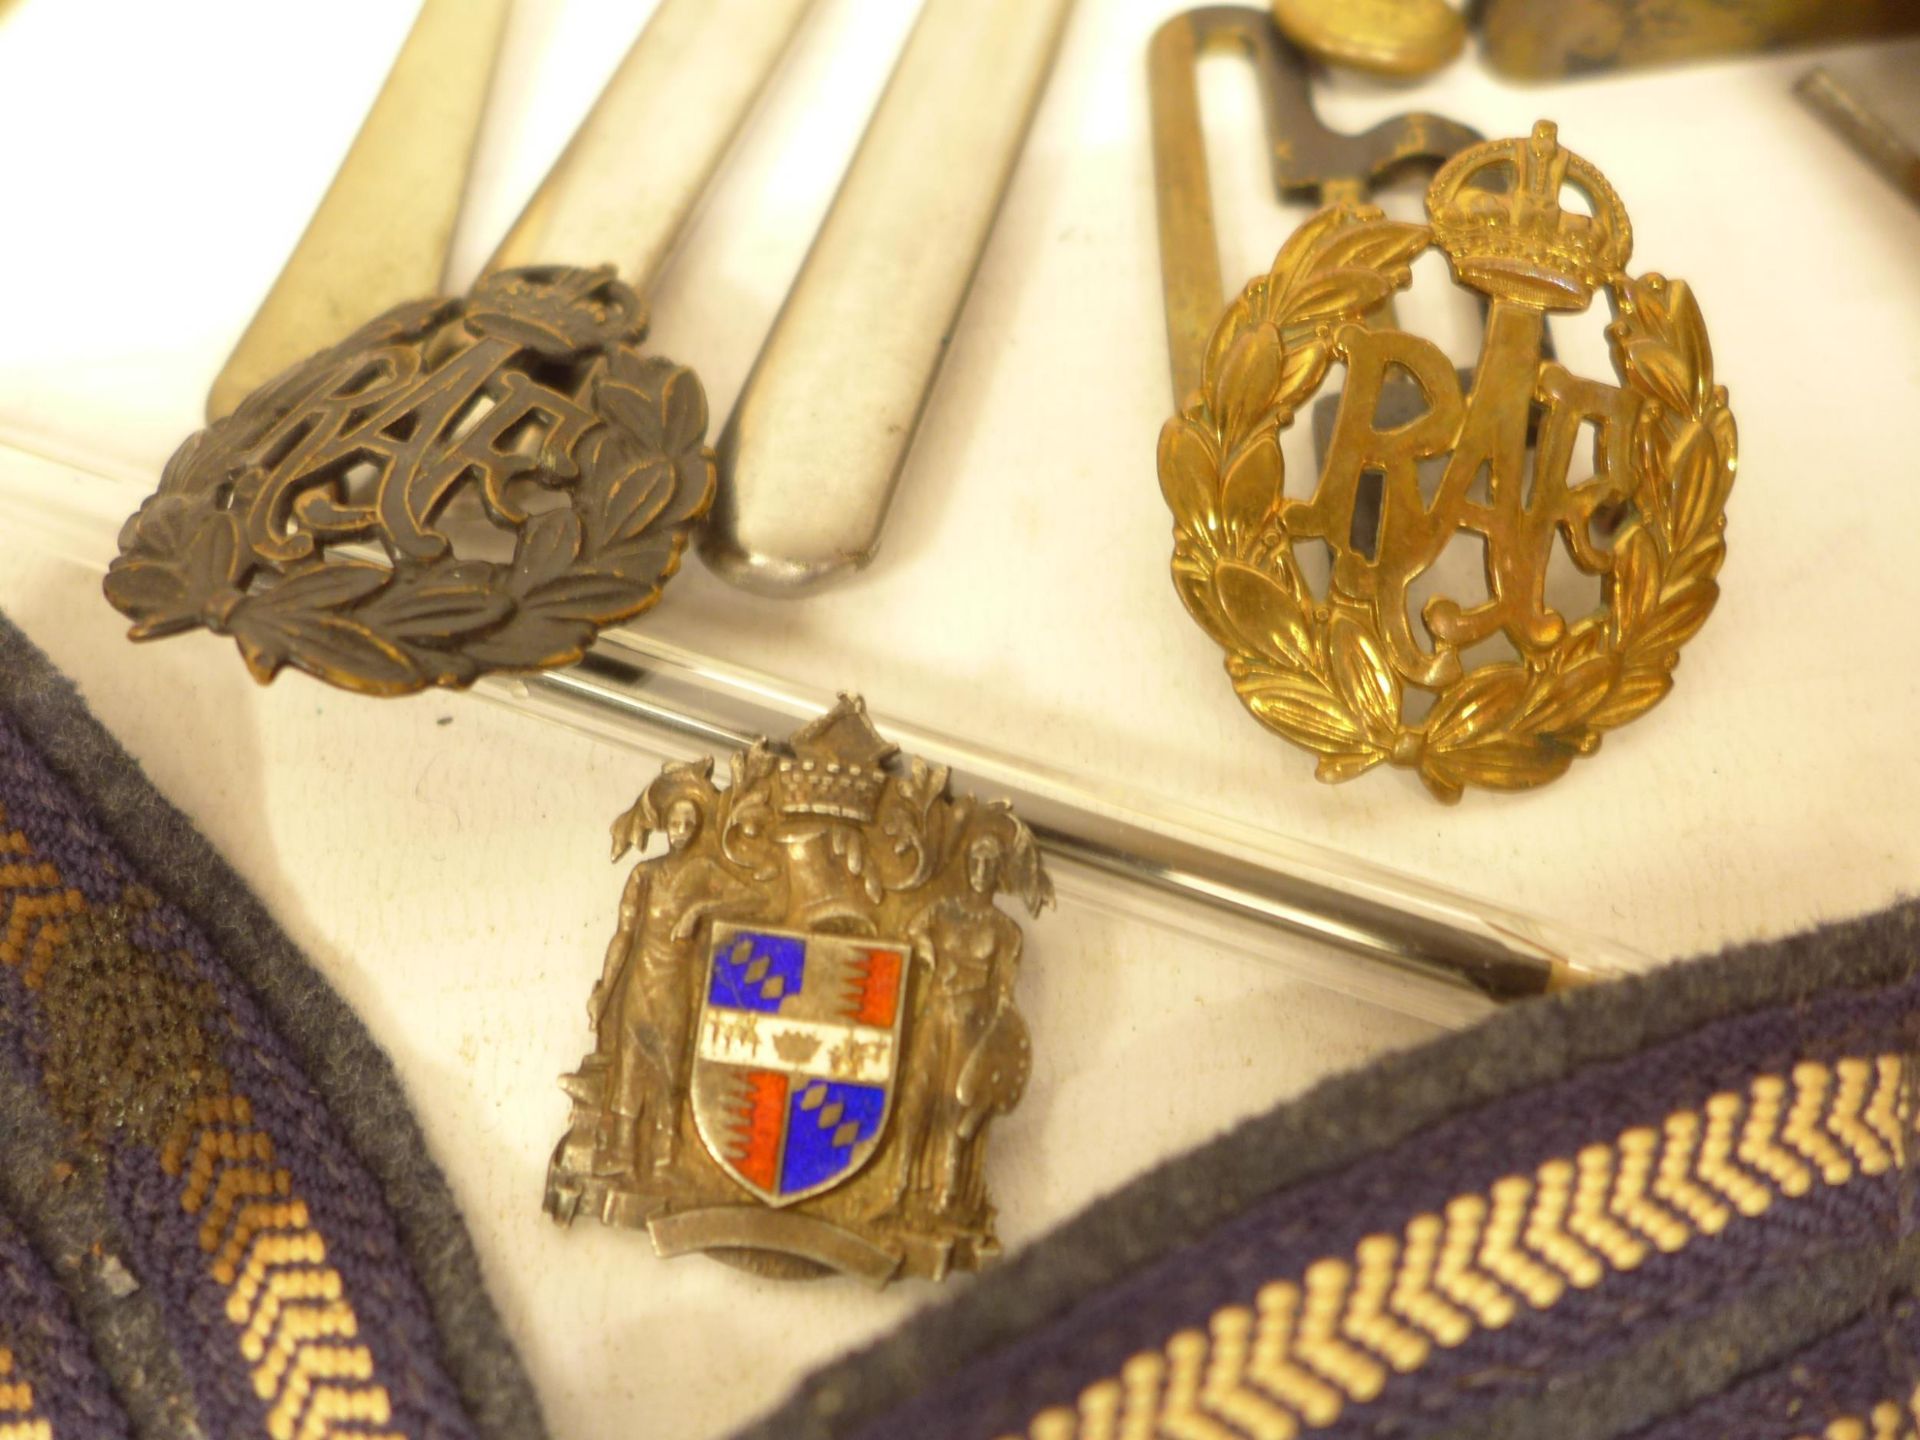 A COLLECTION OF RAF ITEMS TO INCLUDE STRIPES, BADGES, CUTLERY, BOOKLETS ETC - Image 5 of 6